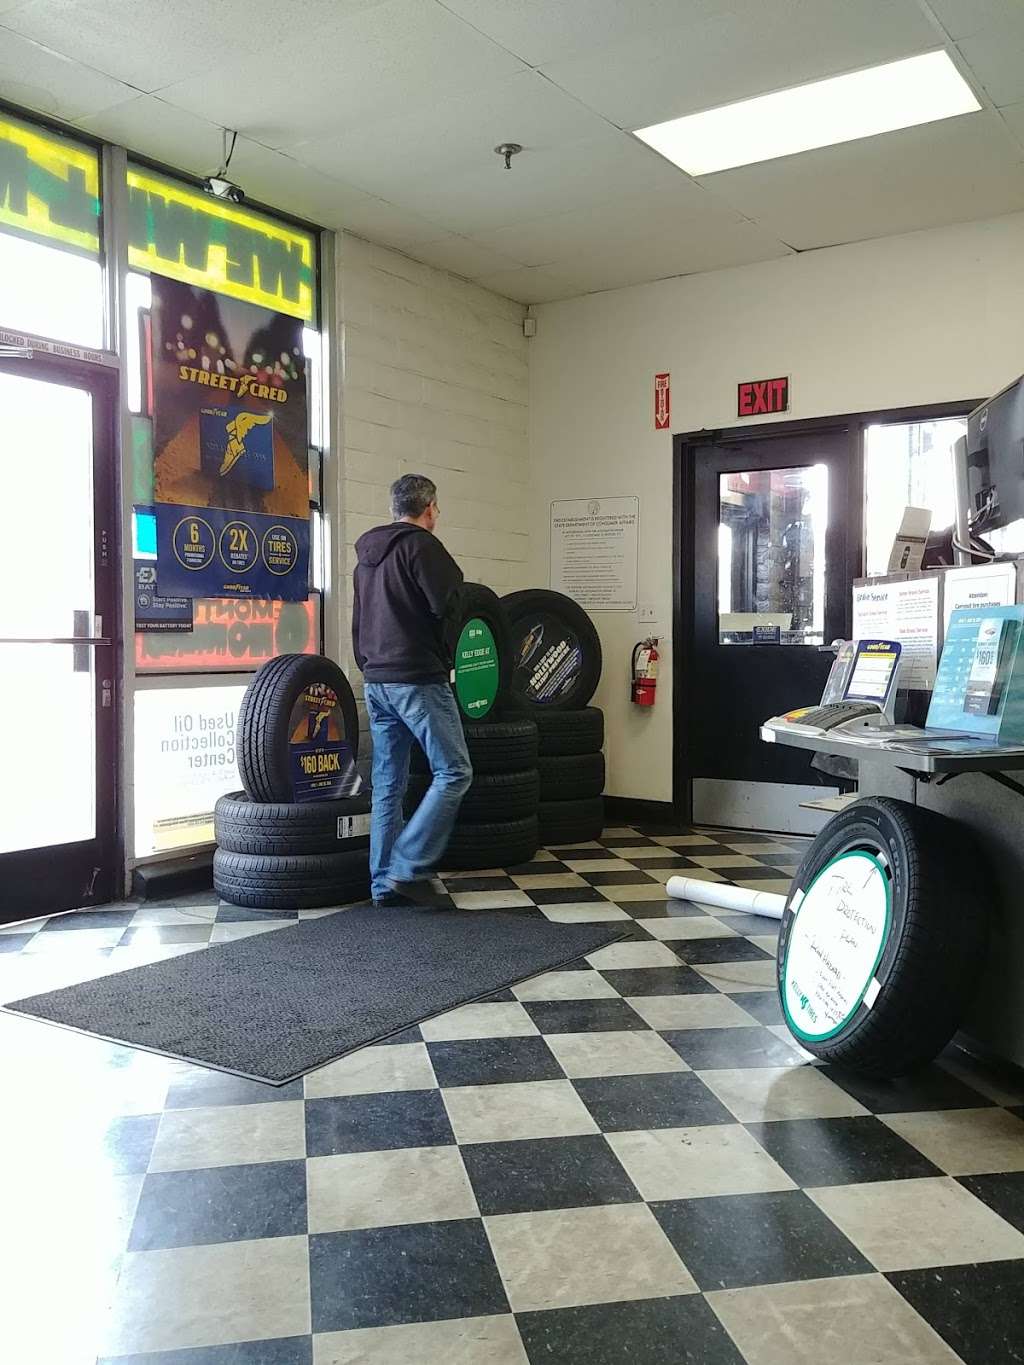 Certified Tire & Service Centers | 6072 Camino Real, Riverside, CA 92509, USA | Phone: (951) 685-1000